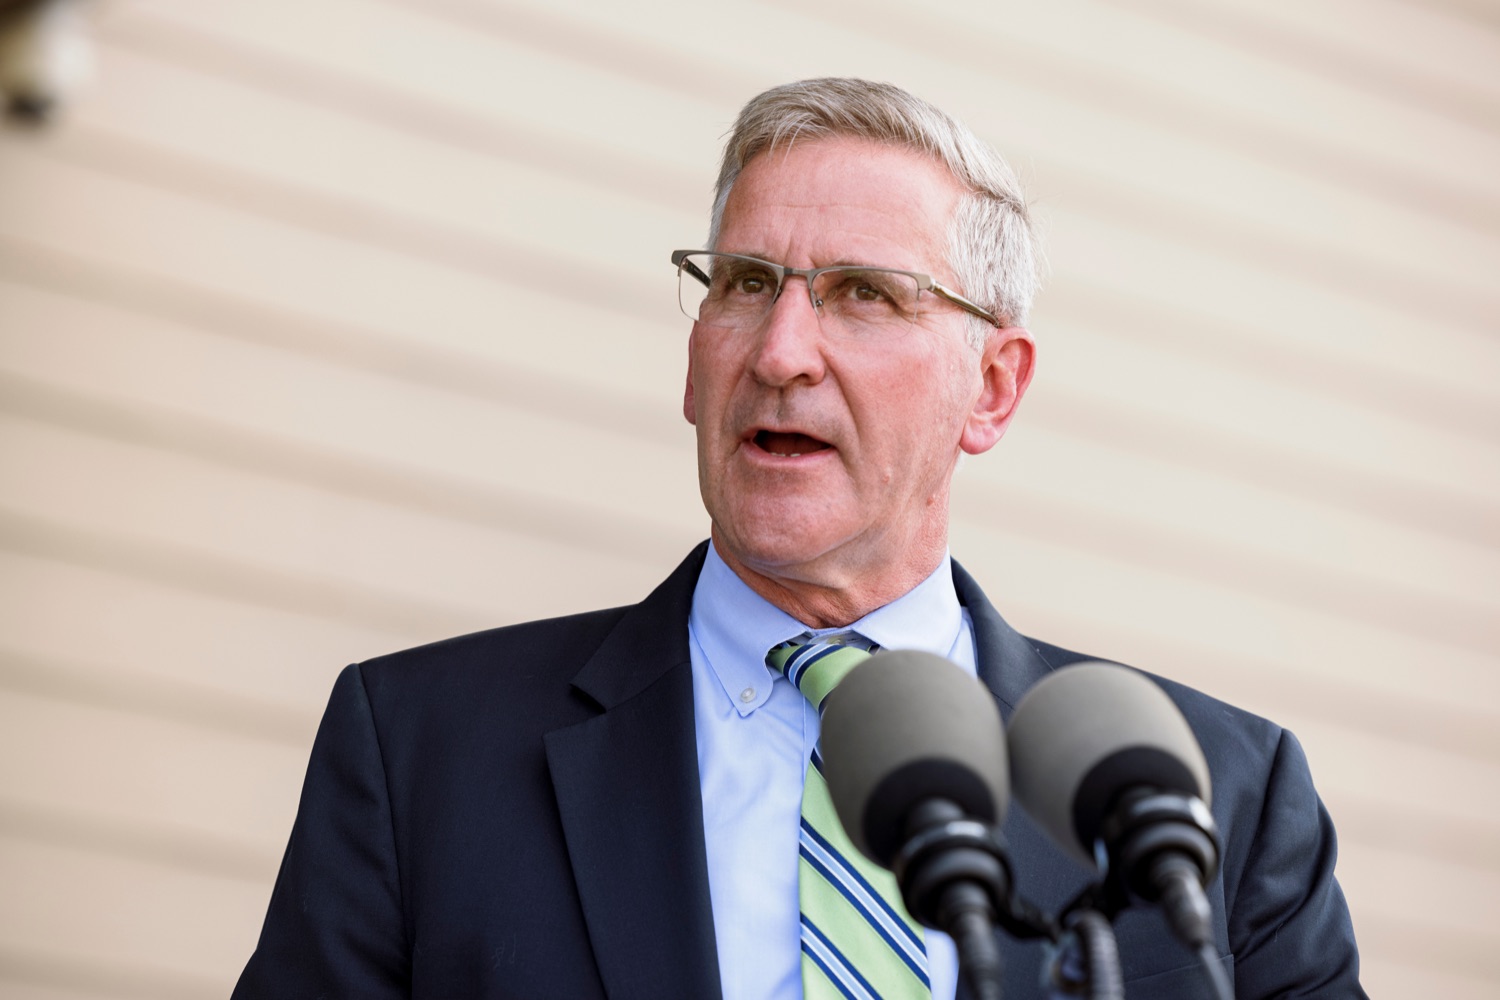 PA Dept. of Agriculture Secretary Russell Redding speaks during a press conference, which highlighted the success of Pennsylvania's farm to school programs, at Hill Top Academy in Mechanicsburg on Friday, August 27, 2021.<br><a href="https://filesource.amperwave.net/commonwealthofpa/photo/19054_AGRIC_FarmToSchool_NK_001.jpg" target="_blank">⇣ Download Photo</a>